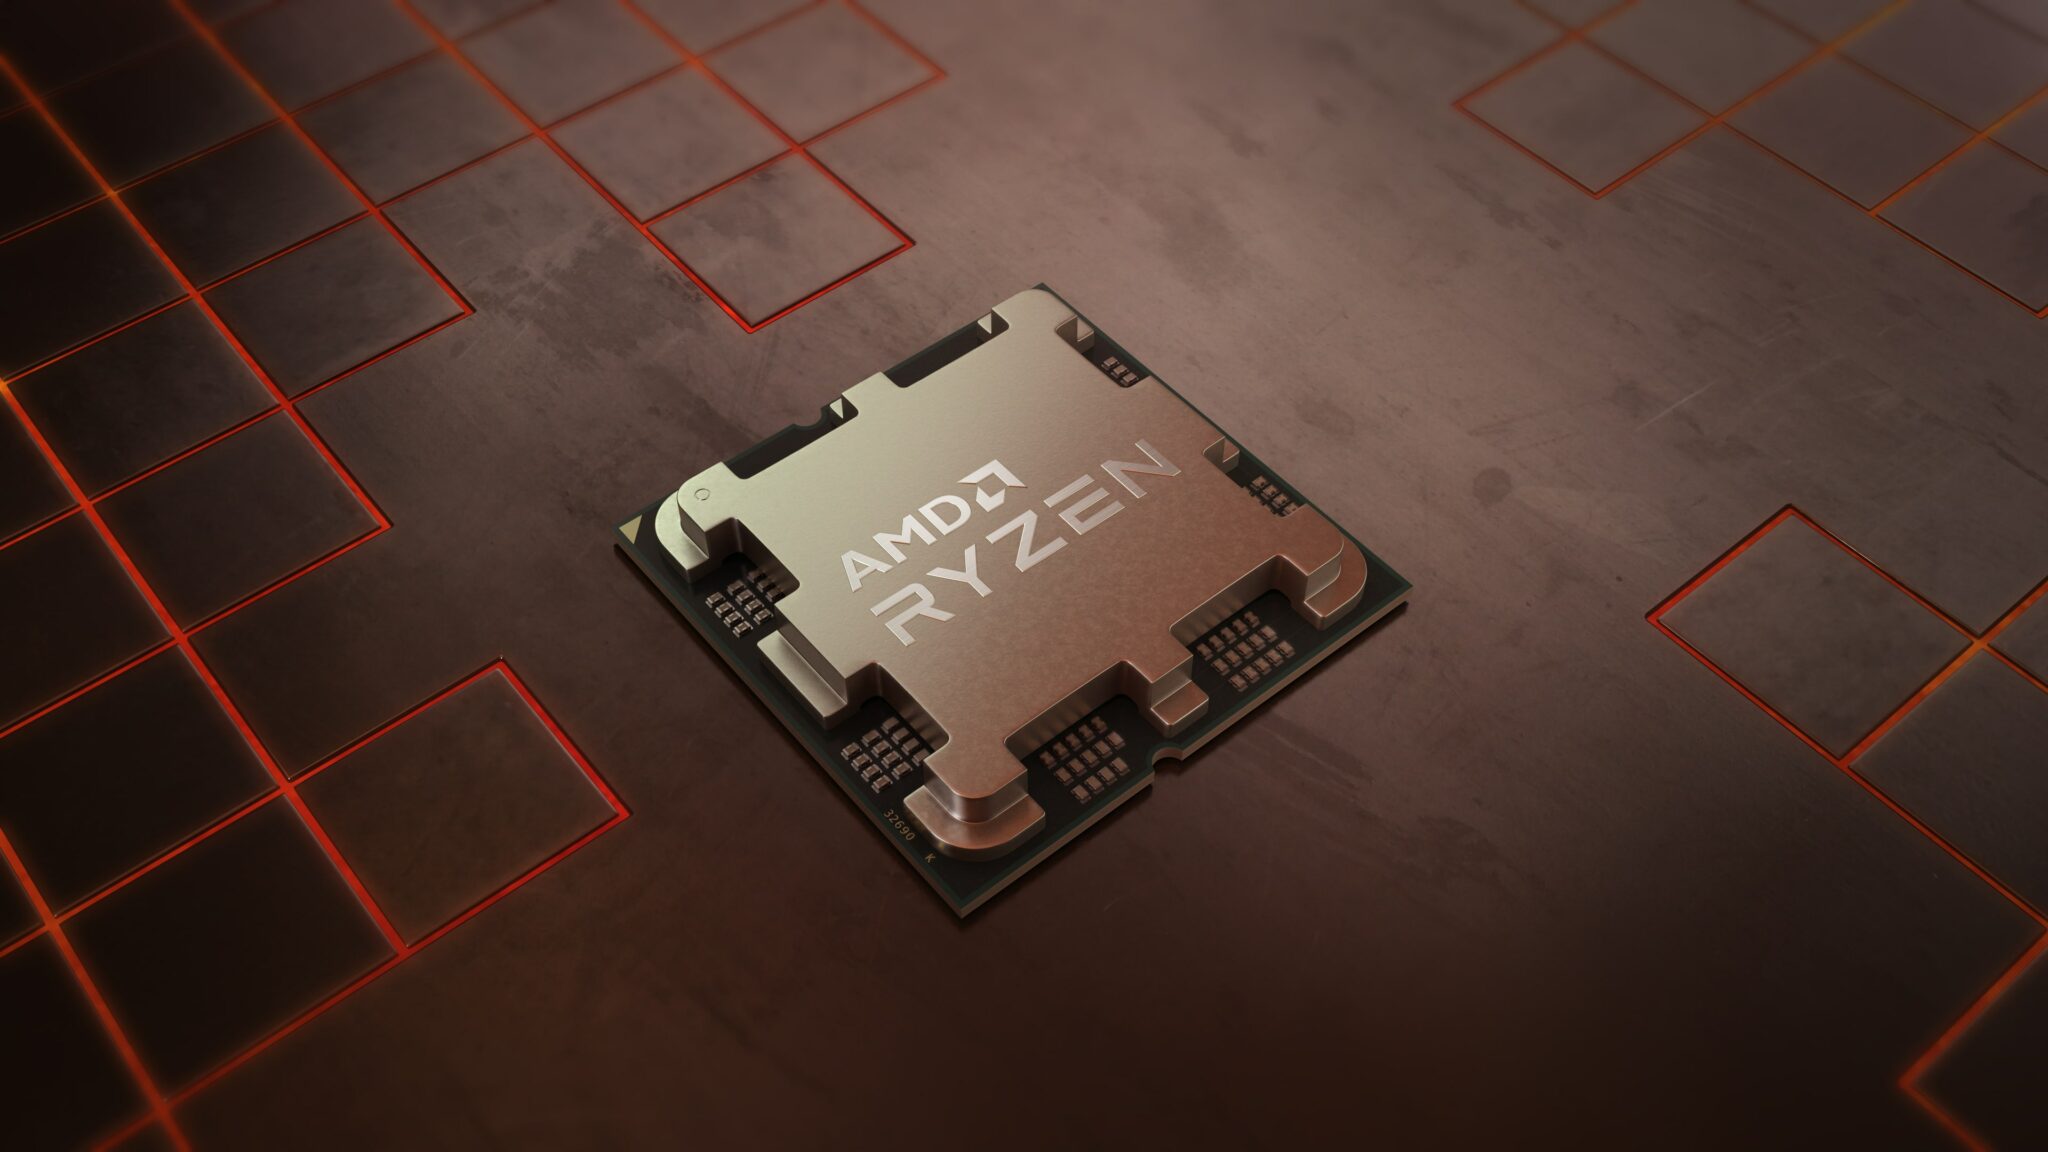 AMD Ryzen 7 7800X3D review: A gaming powerhouse CPU with one weakness